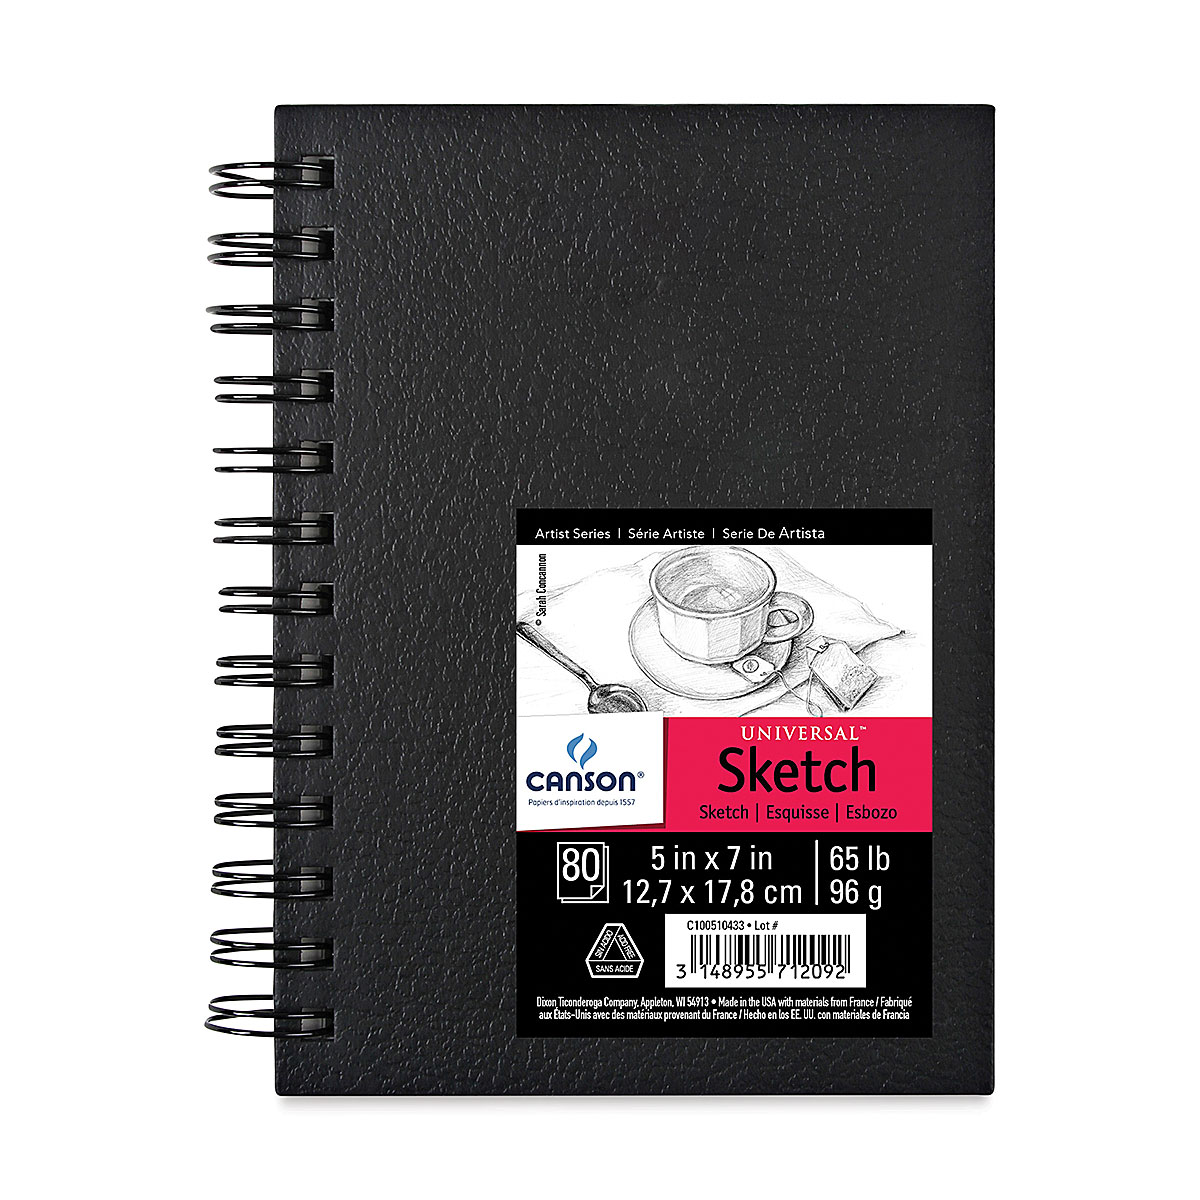 5x7 Sketchbook: 5 x 7 inches, 100 pages, 90 gsm, 5x7 Sketchbook, 5 x 7  Sketchbook, 5 x 7 Sketch Book, 5 x 7 Sketch Pad, 5x7 Sketch Book, 5x7  Sketch